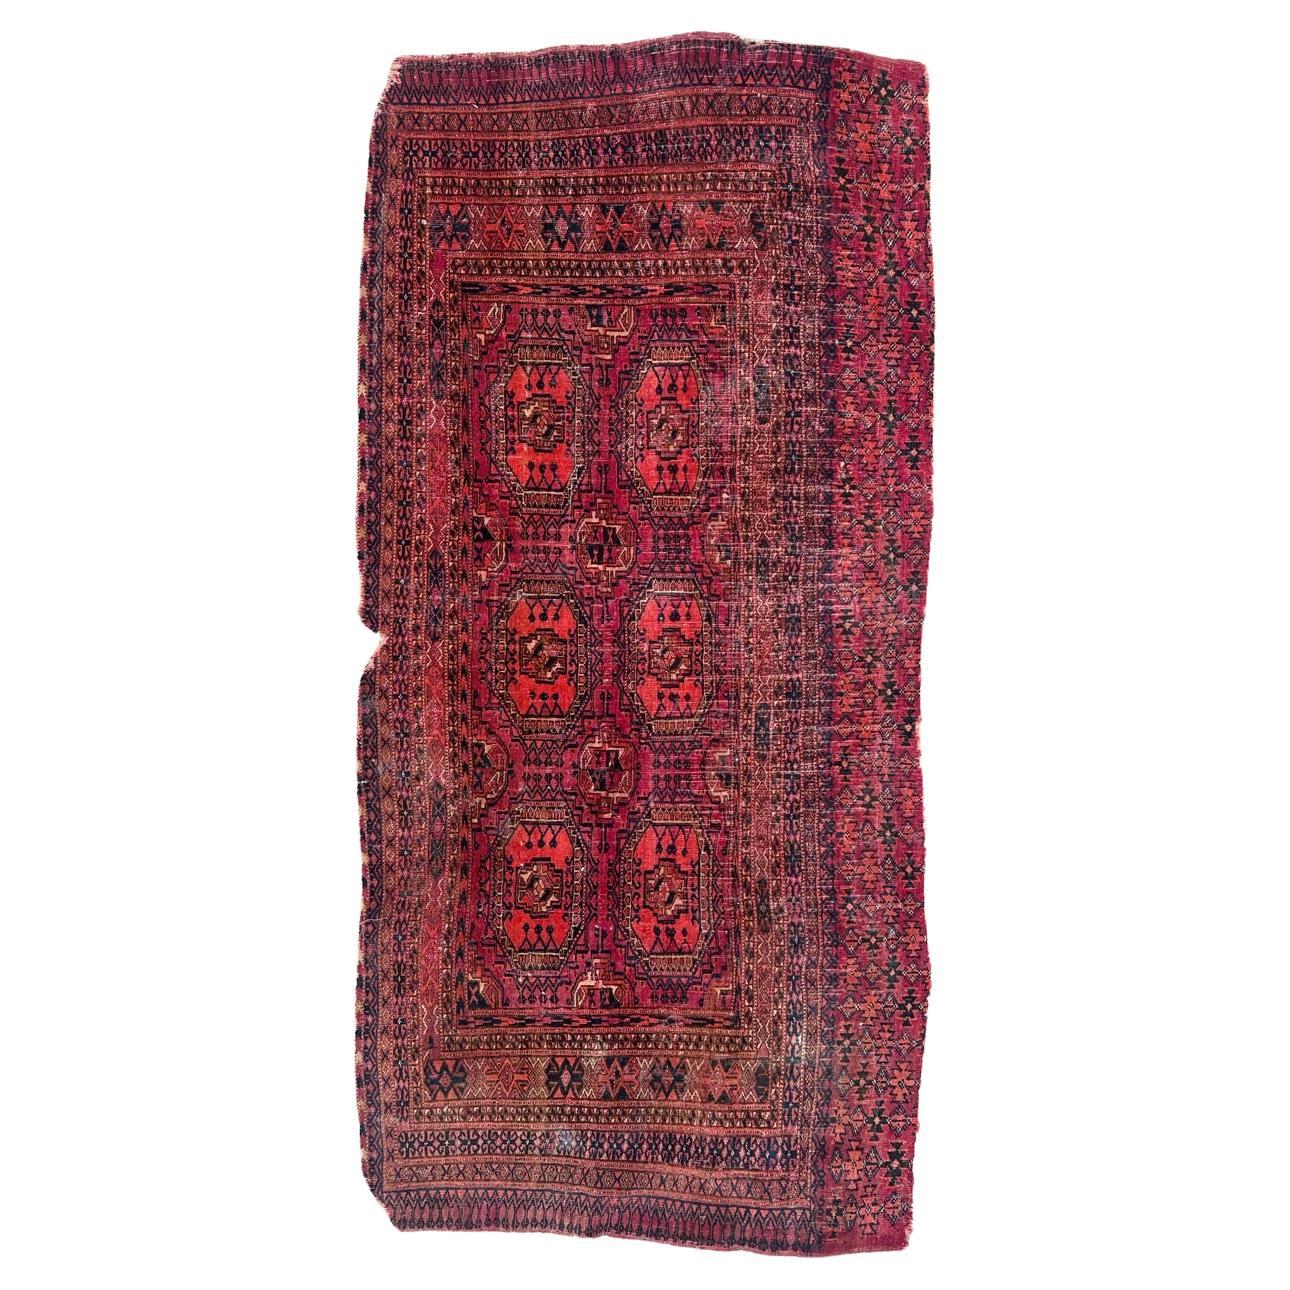  Antique Turkmen Yomut Chuval Horse Cover Rug For Sale